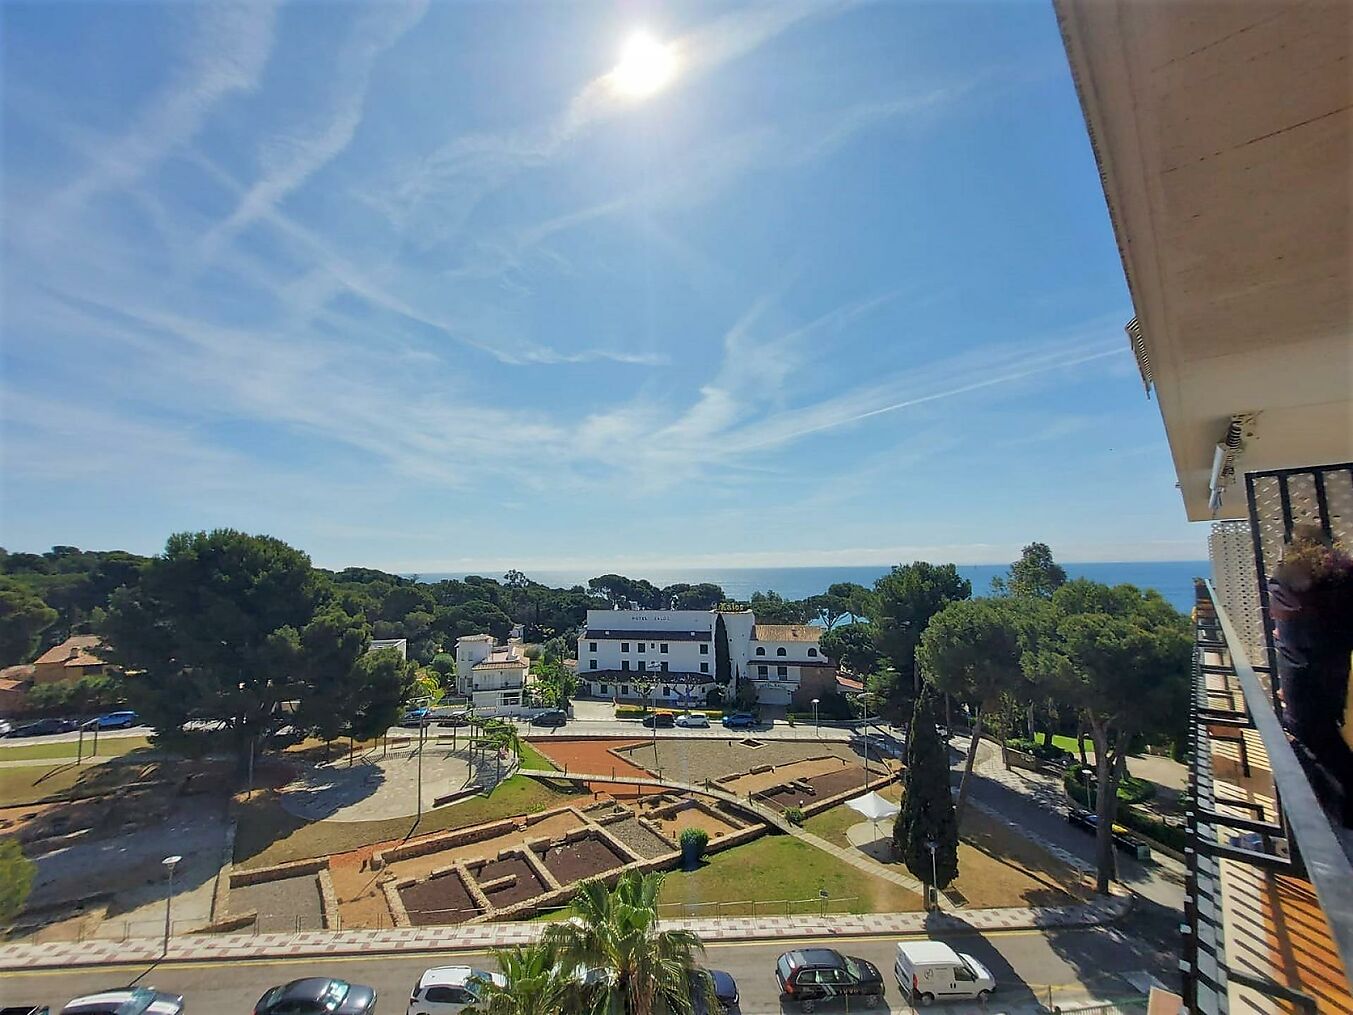 Apartment with sea views in Platja d'Aro